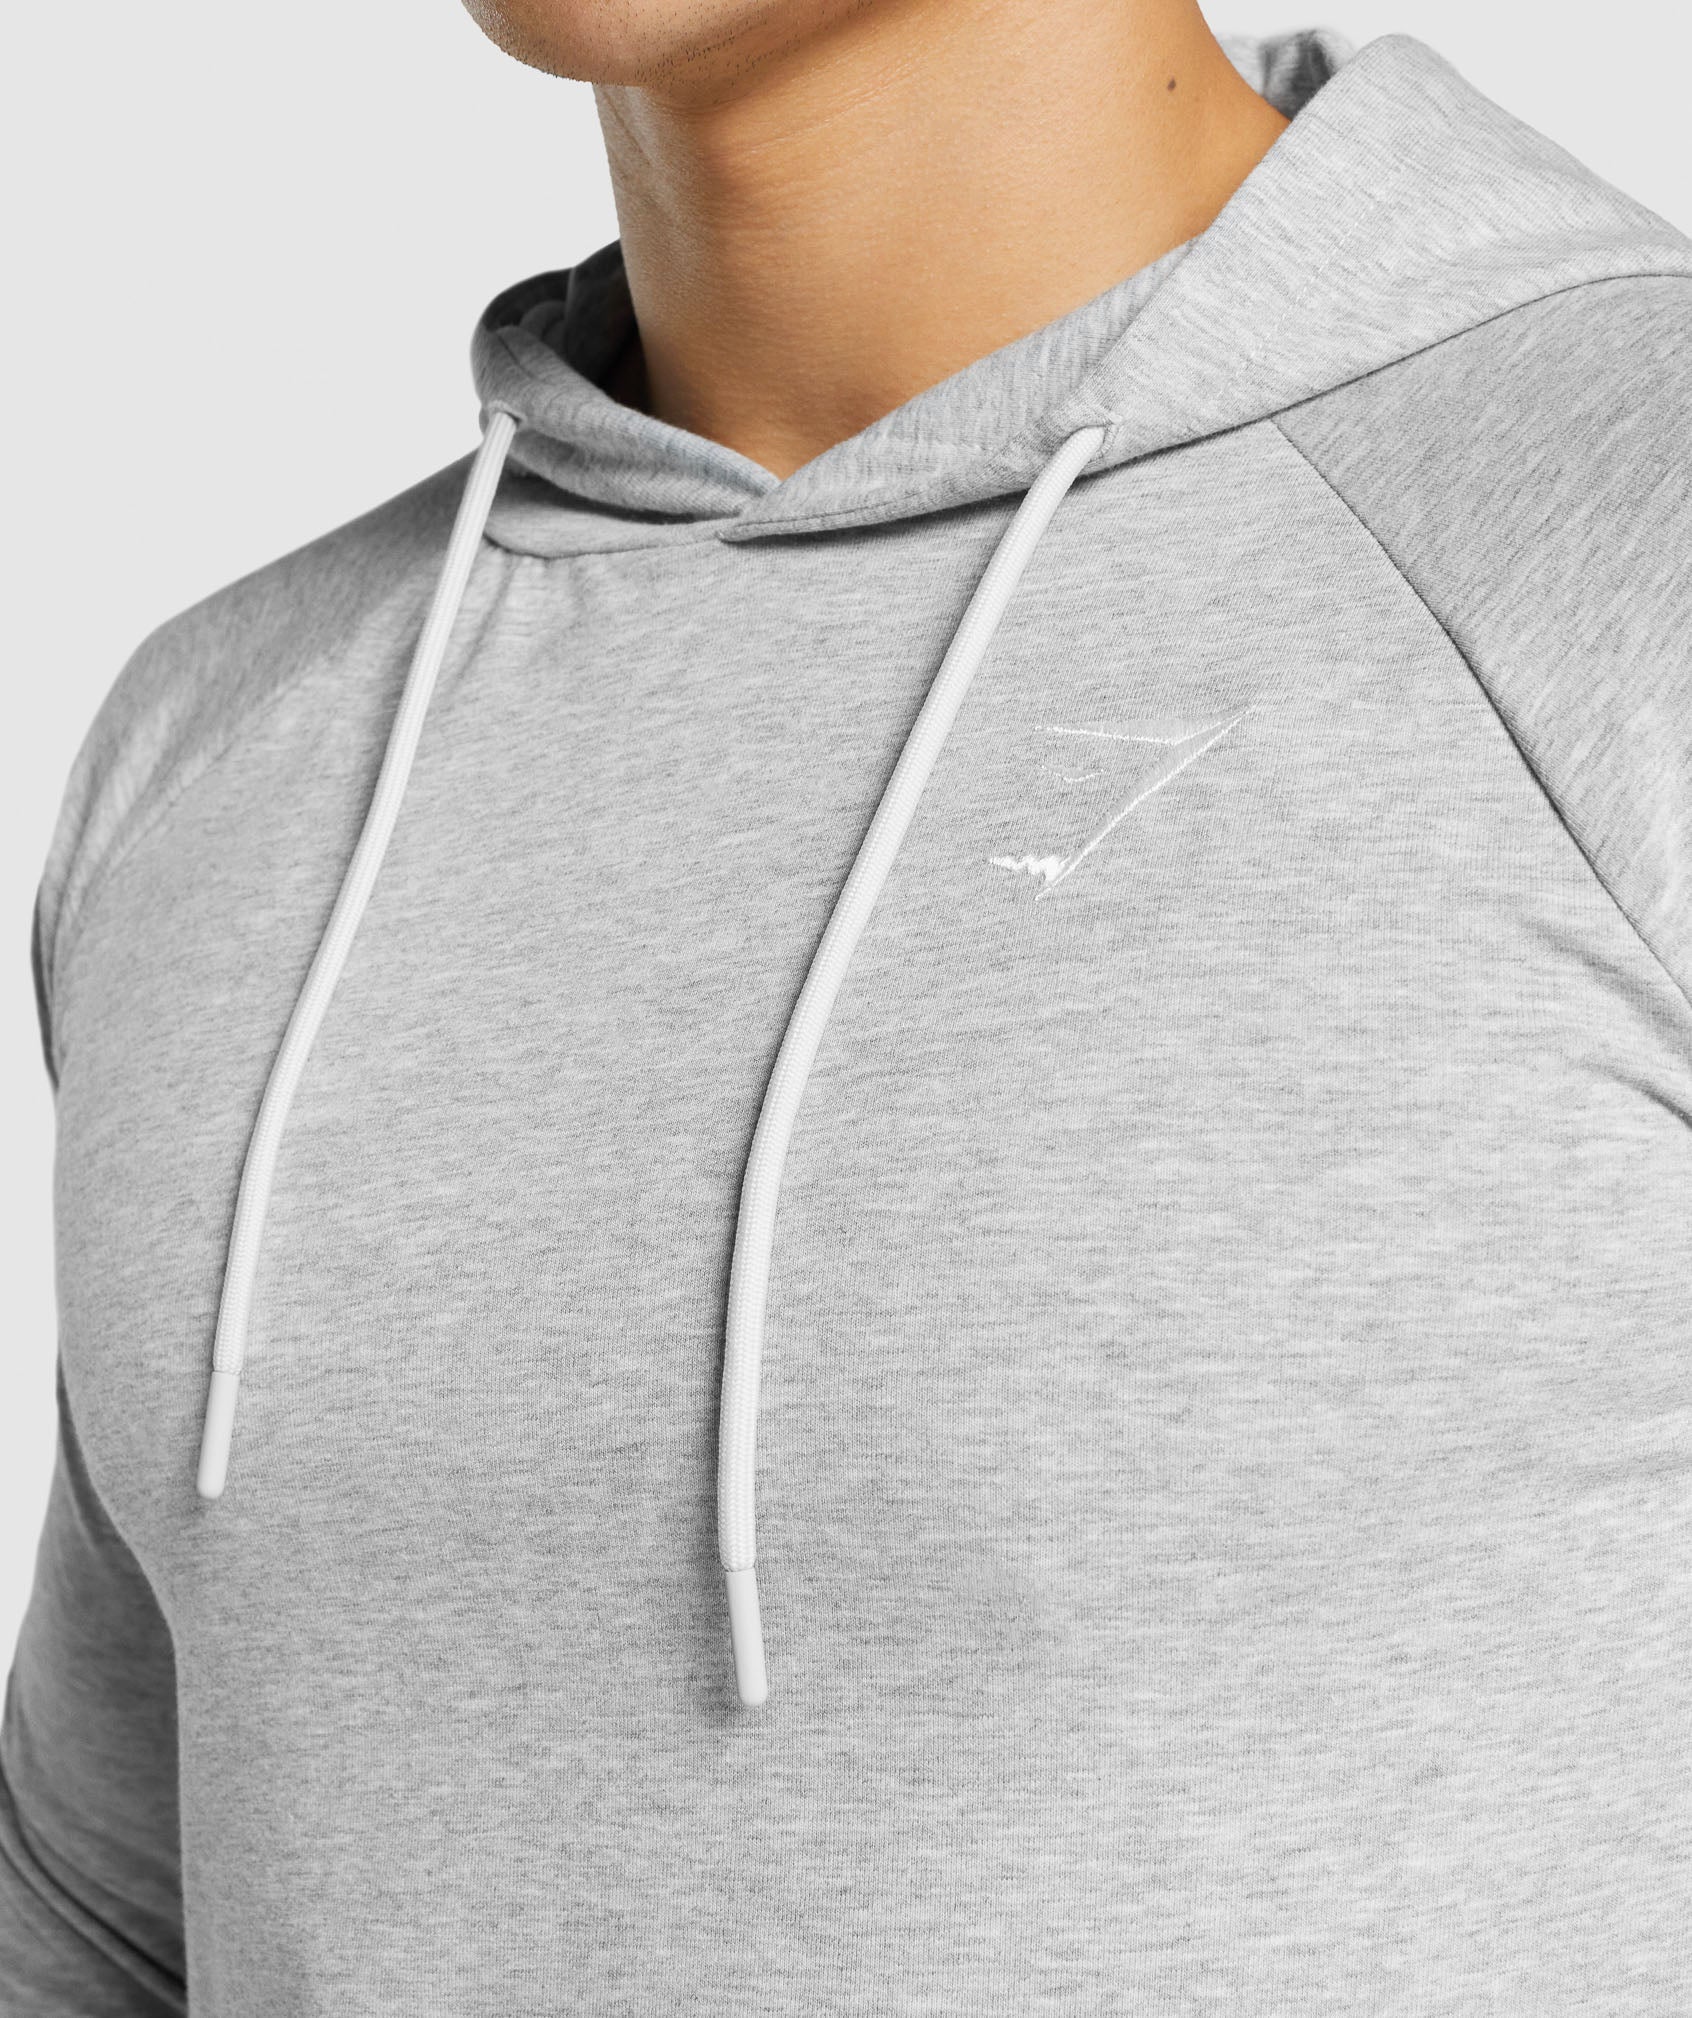 Critical 2.0 Hoodie in Light Grey Marl - view 6